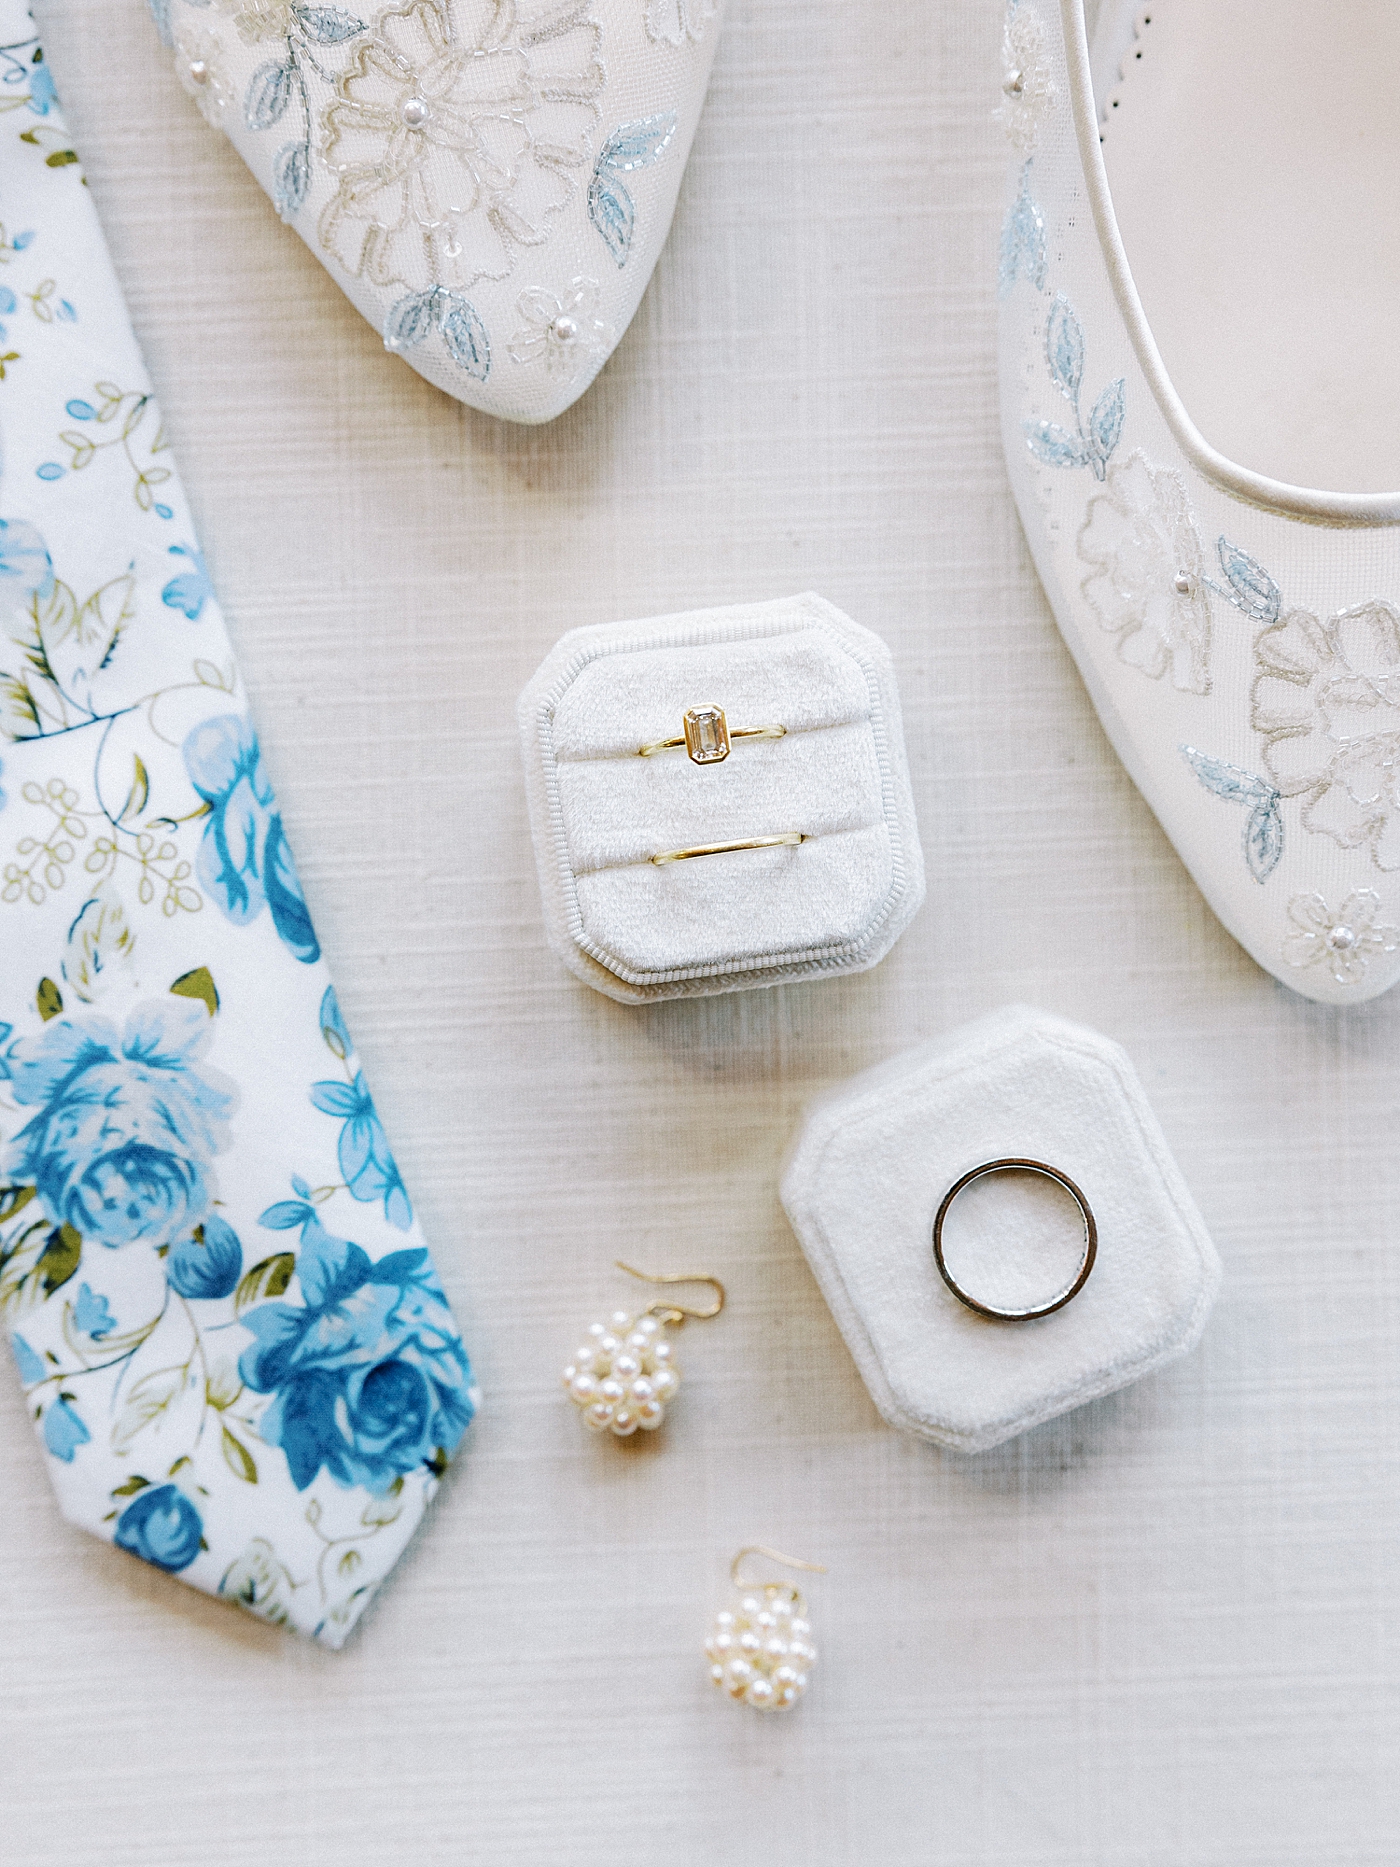 Bride's details styled with her shoes | Photo by Diane Sotero Photography